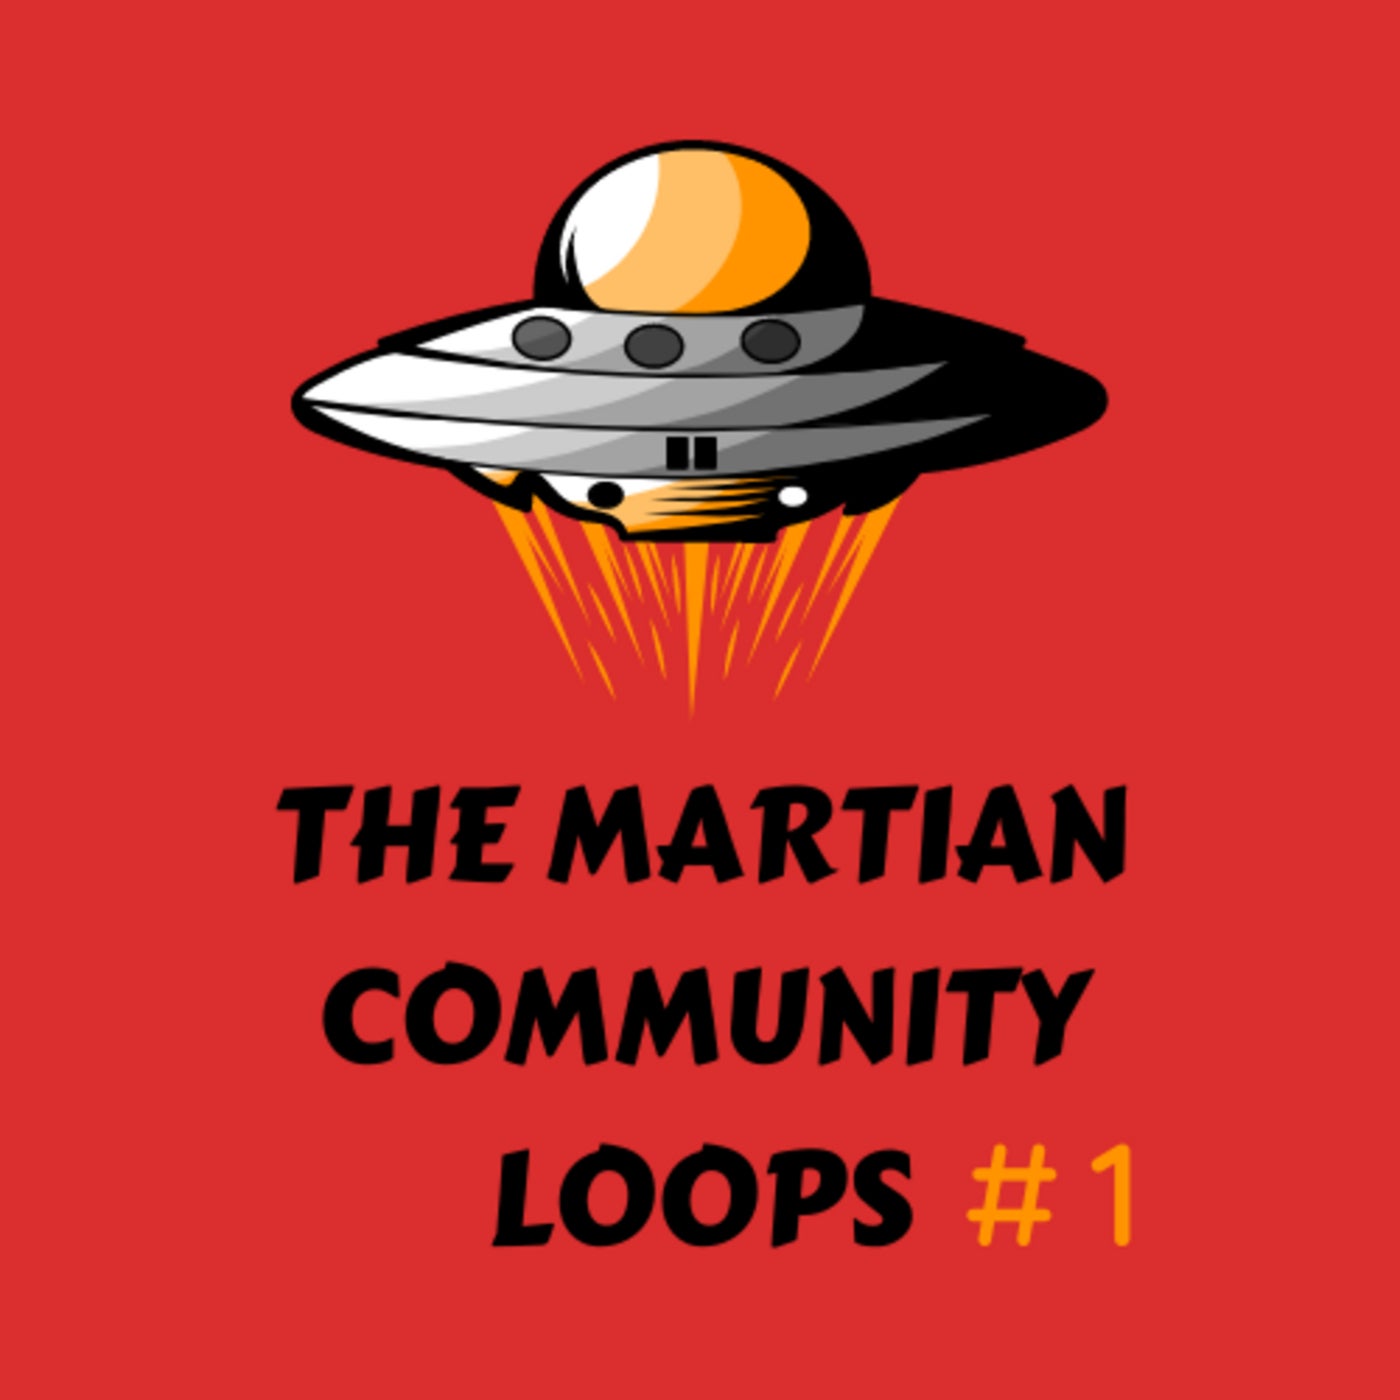 The Martian Community Loops #1